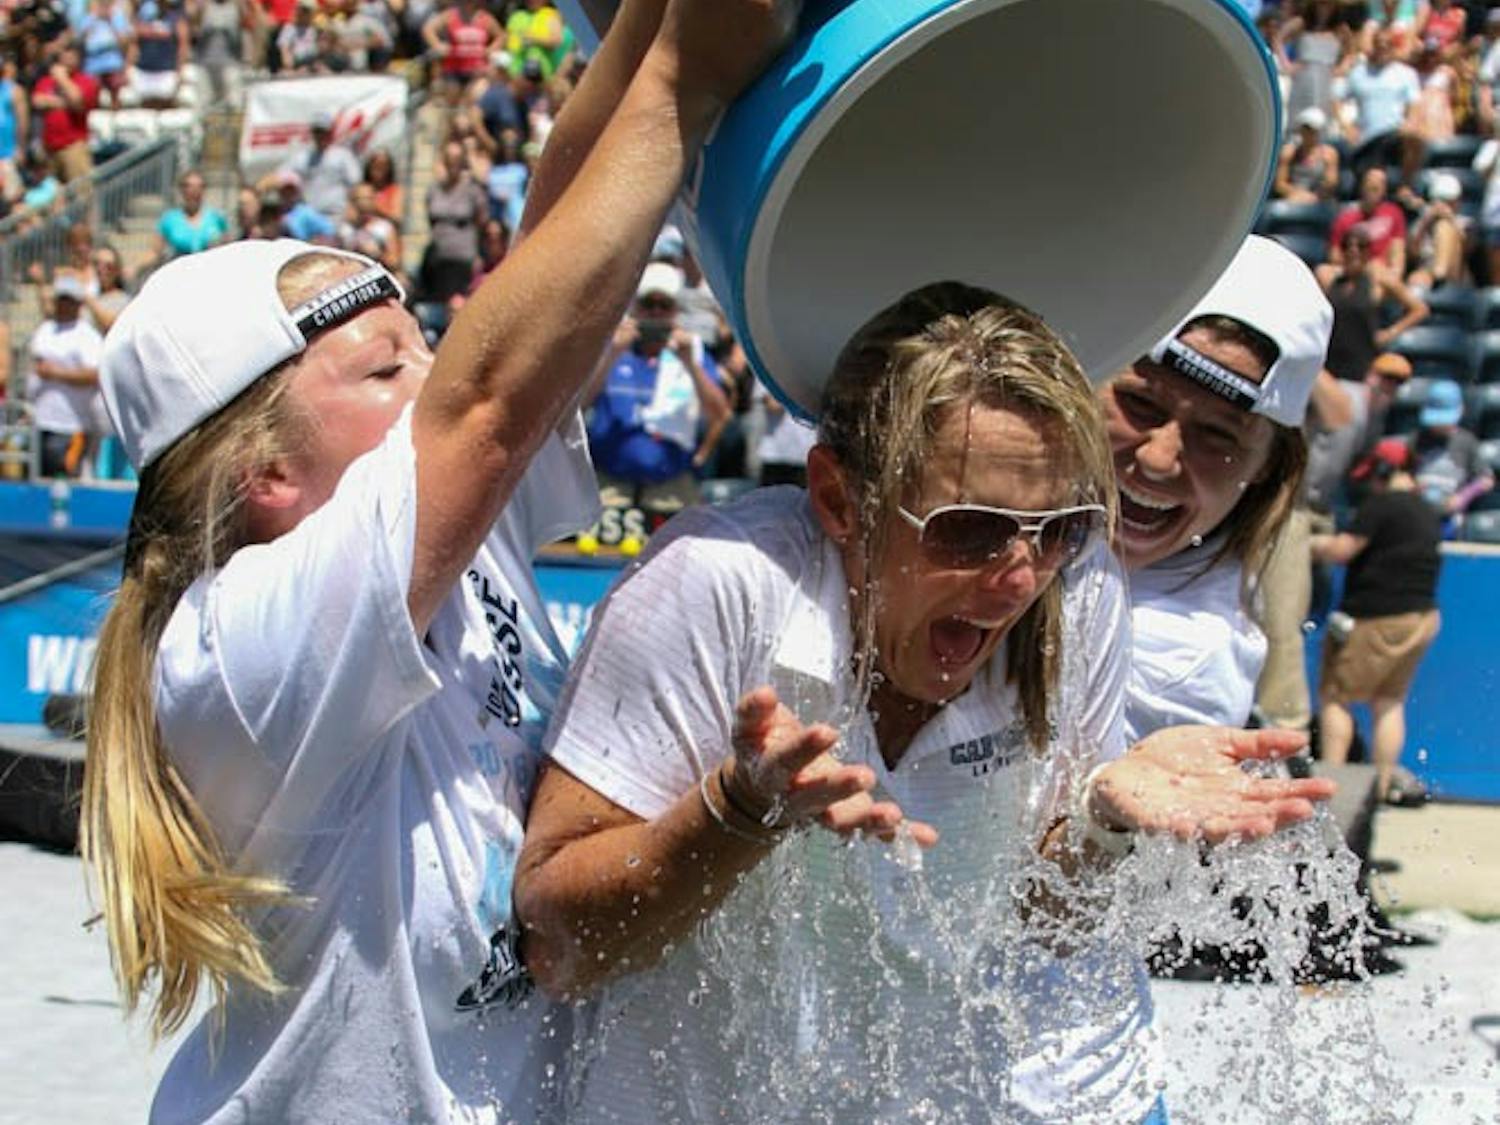 UNC women's lacrosse coach&nbsp;Jenny Levy is given a Gatorade bath by players Caylee Waters (right) and Naomi Lerner (left).&nbsp;The North Carolina women's lacrosse team defeated Maryland 13-7 to capture the NCAA championship on Sunday at Talen Energy Stadium in Chester, PA.